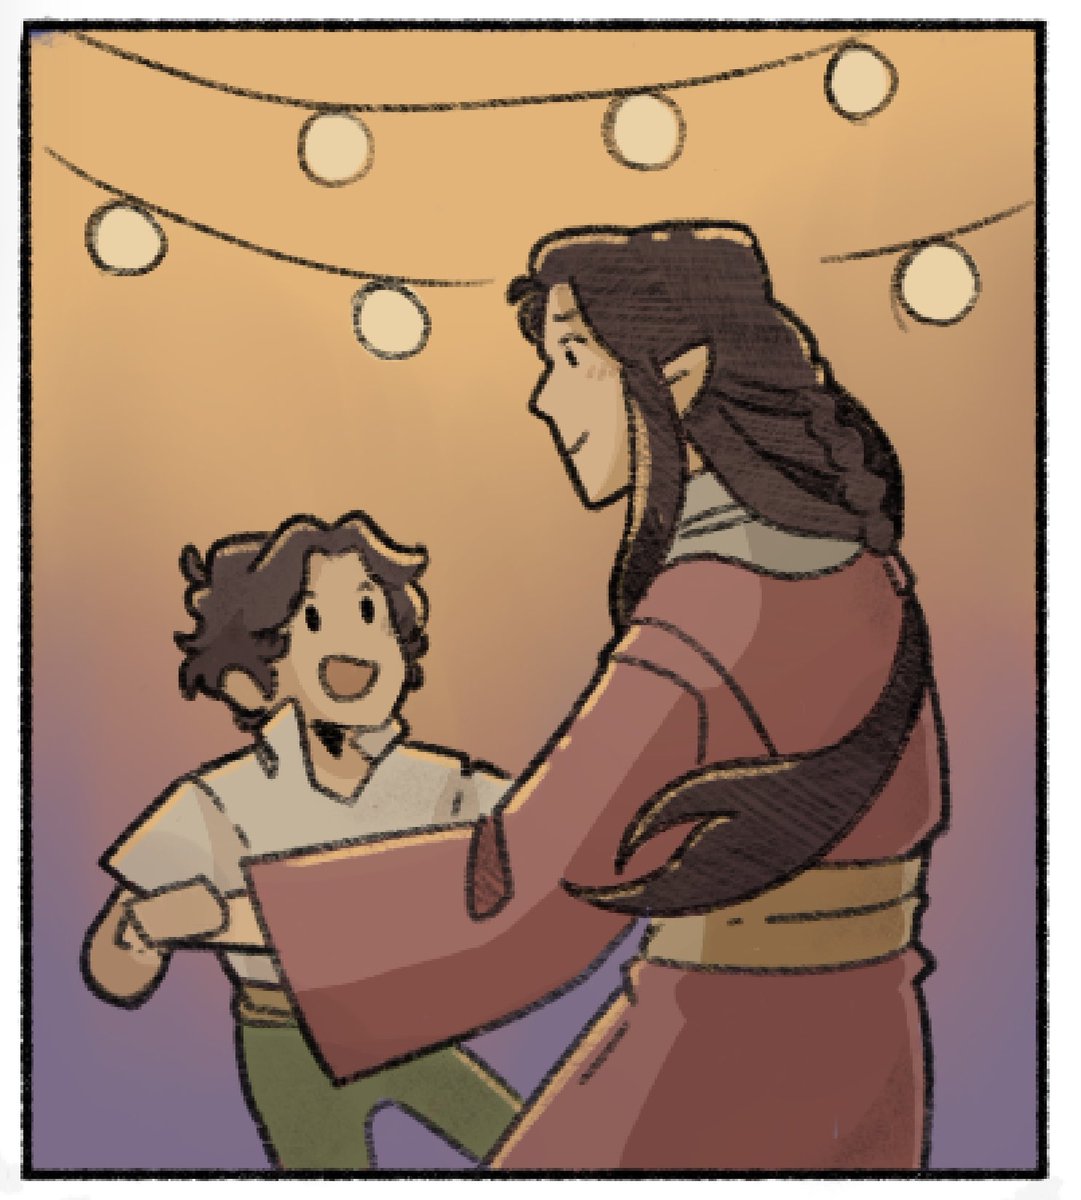 Lil hint for the next page! I just wanted to show this panel cause I thought it was cute #raisingestel